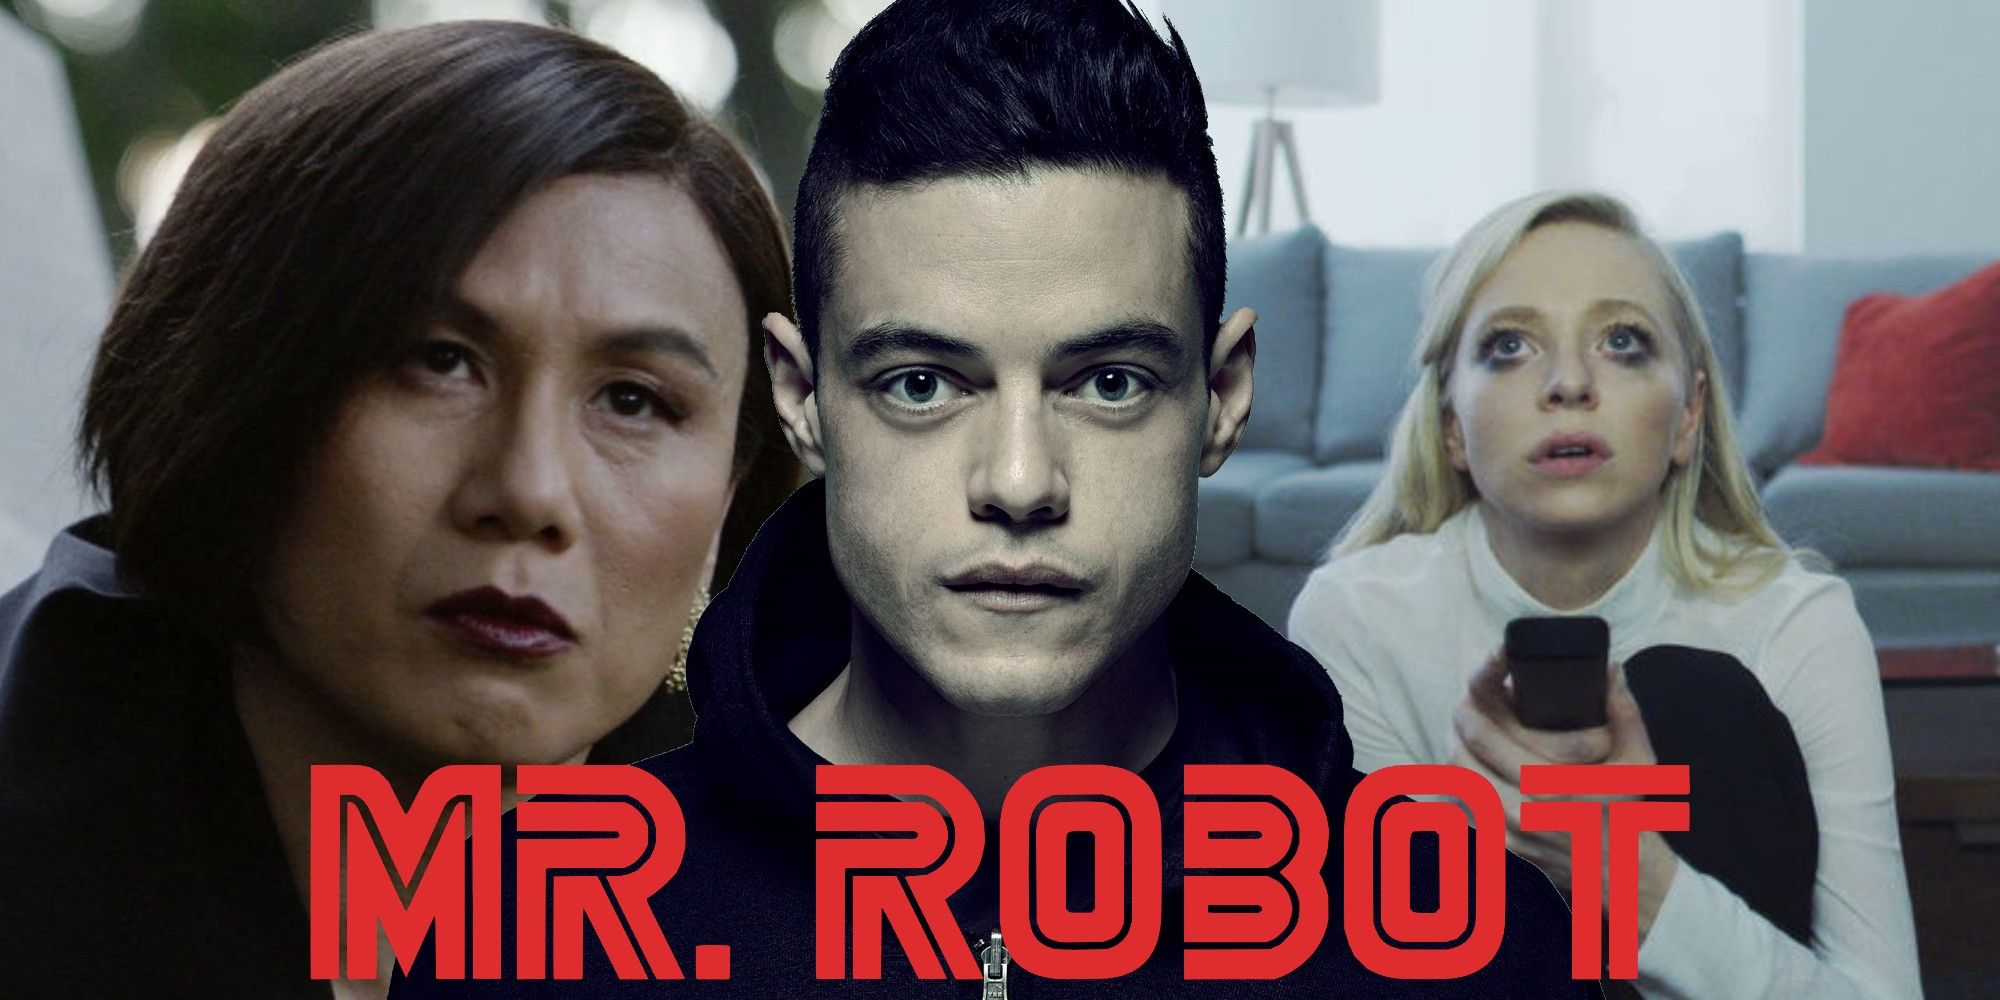 Will Darlene Die In 'Mr. Robot' Season 4? The Show Already Teased Her Fate